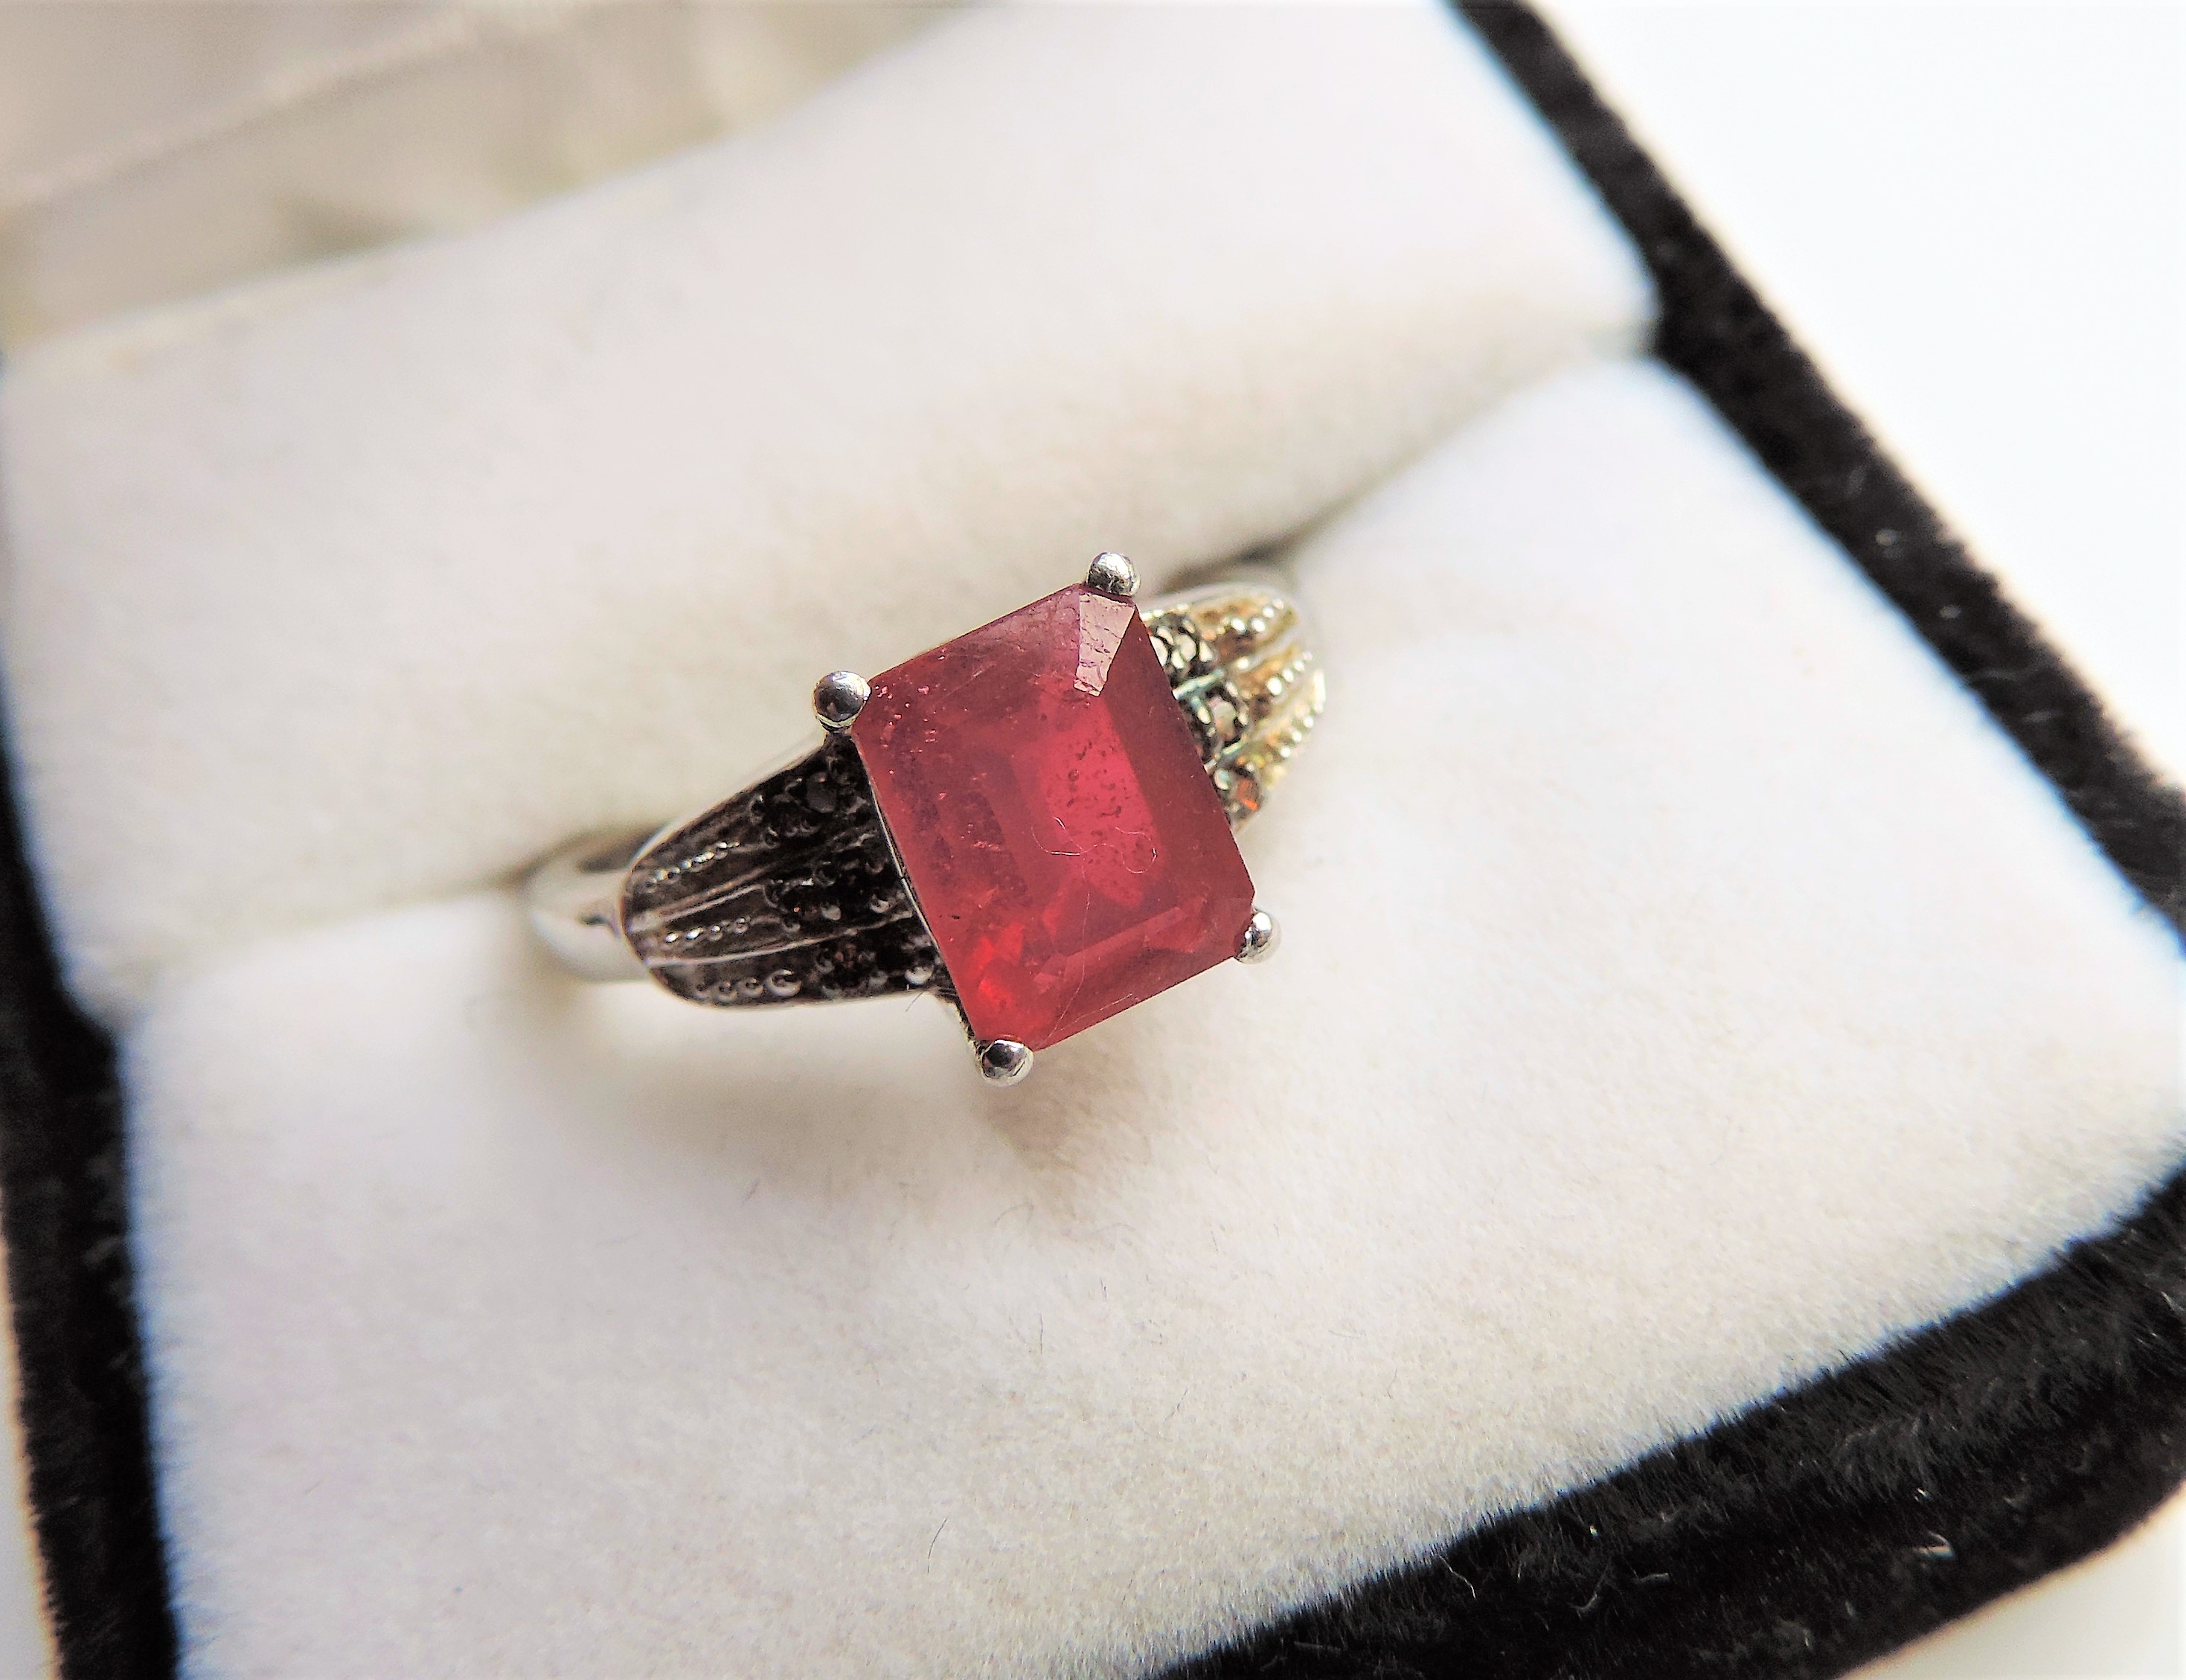 Sterling Silver 1.6 carat Ruby & Diamond Ring - Image 3 of 3